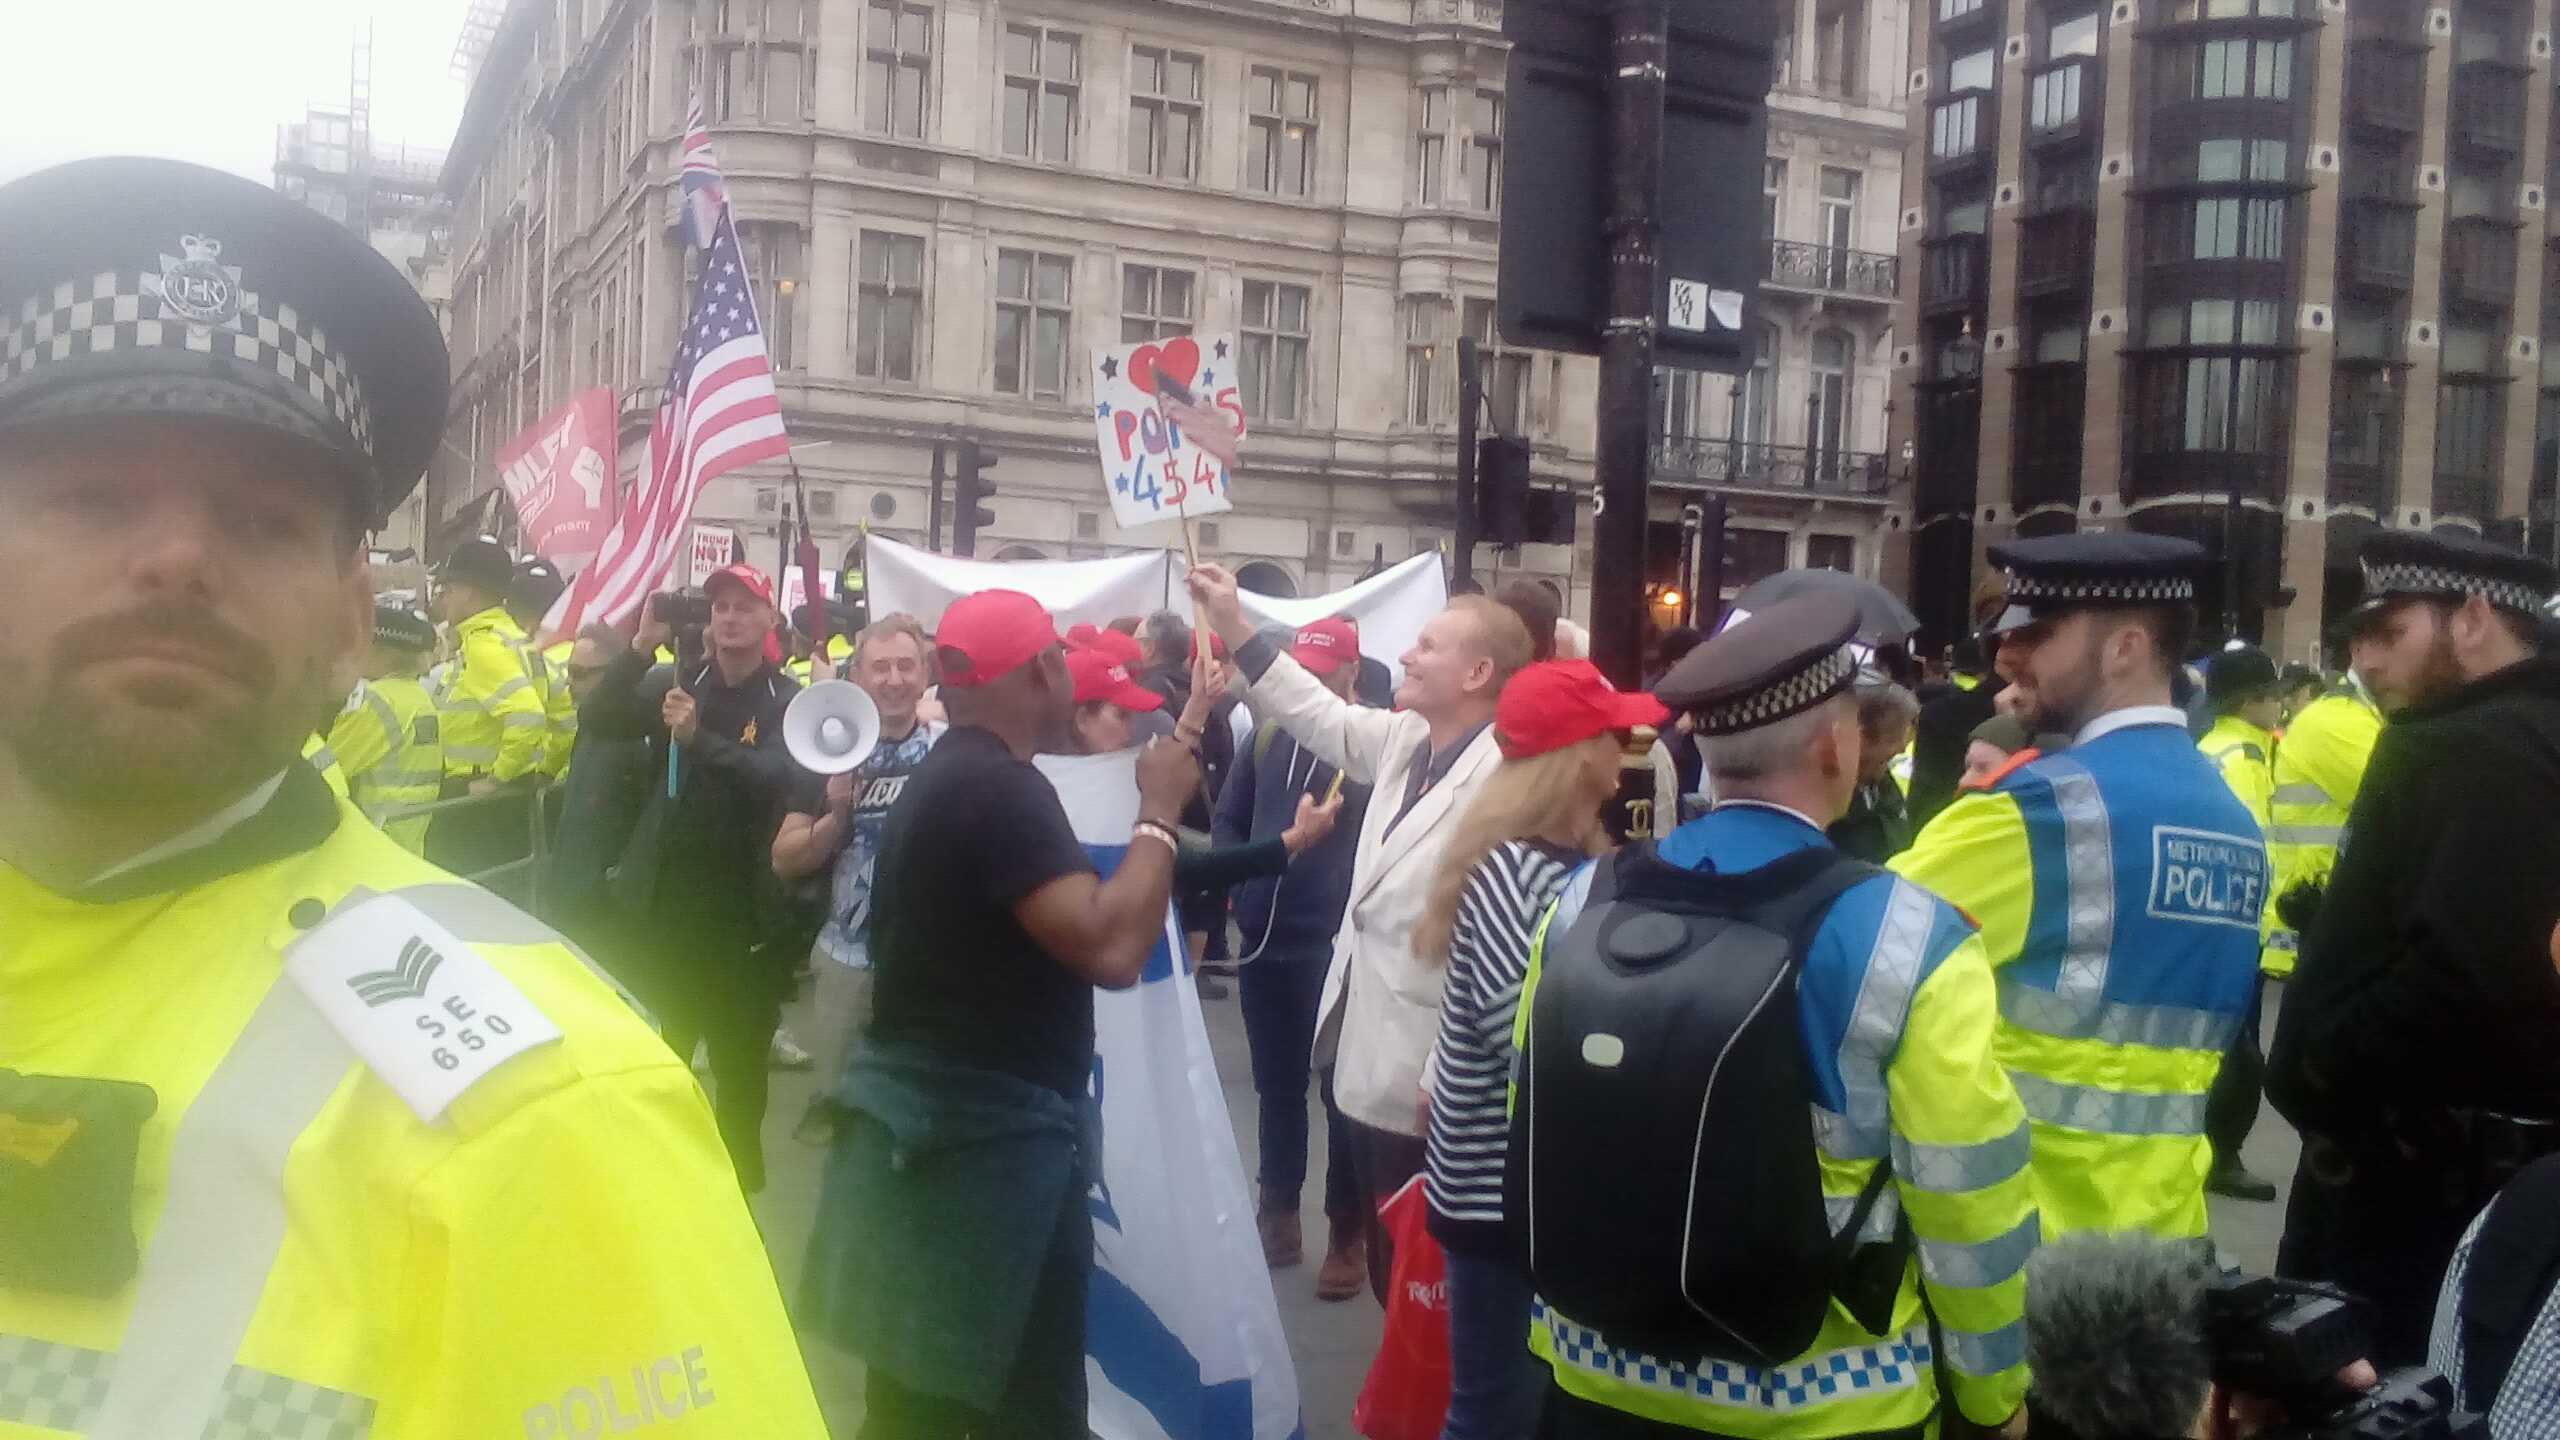 LONDON: Anti-Trump Protest Heats Up But No Violence ... Yet